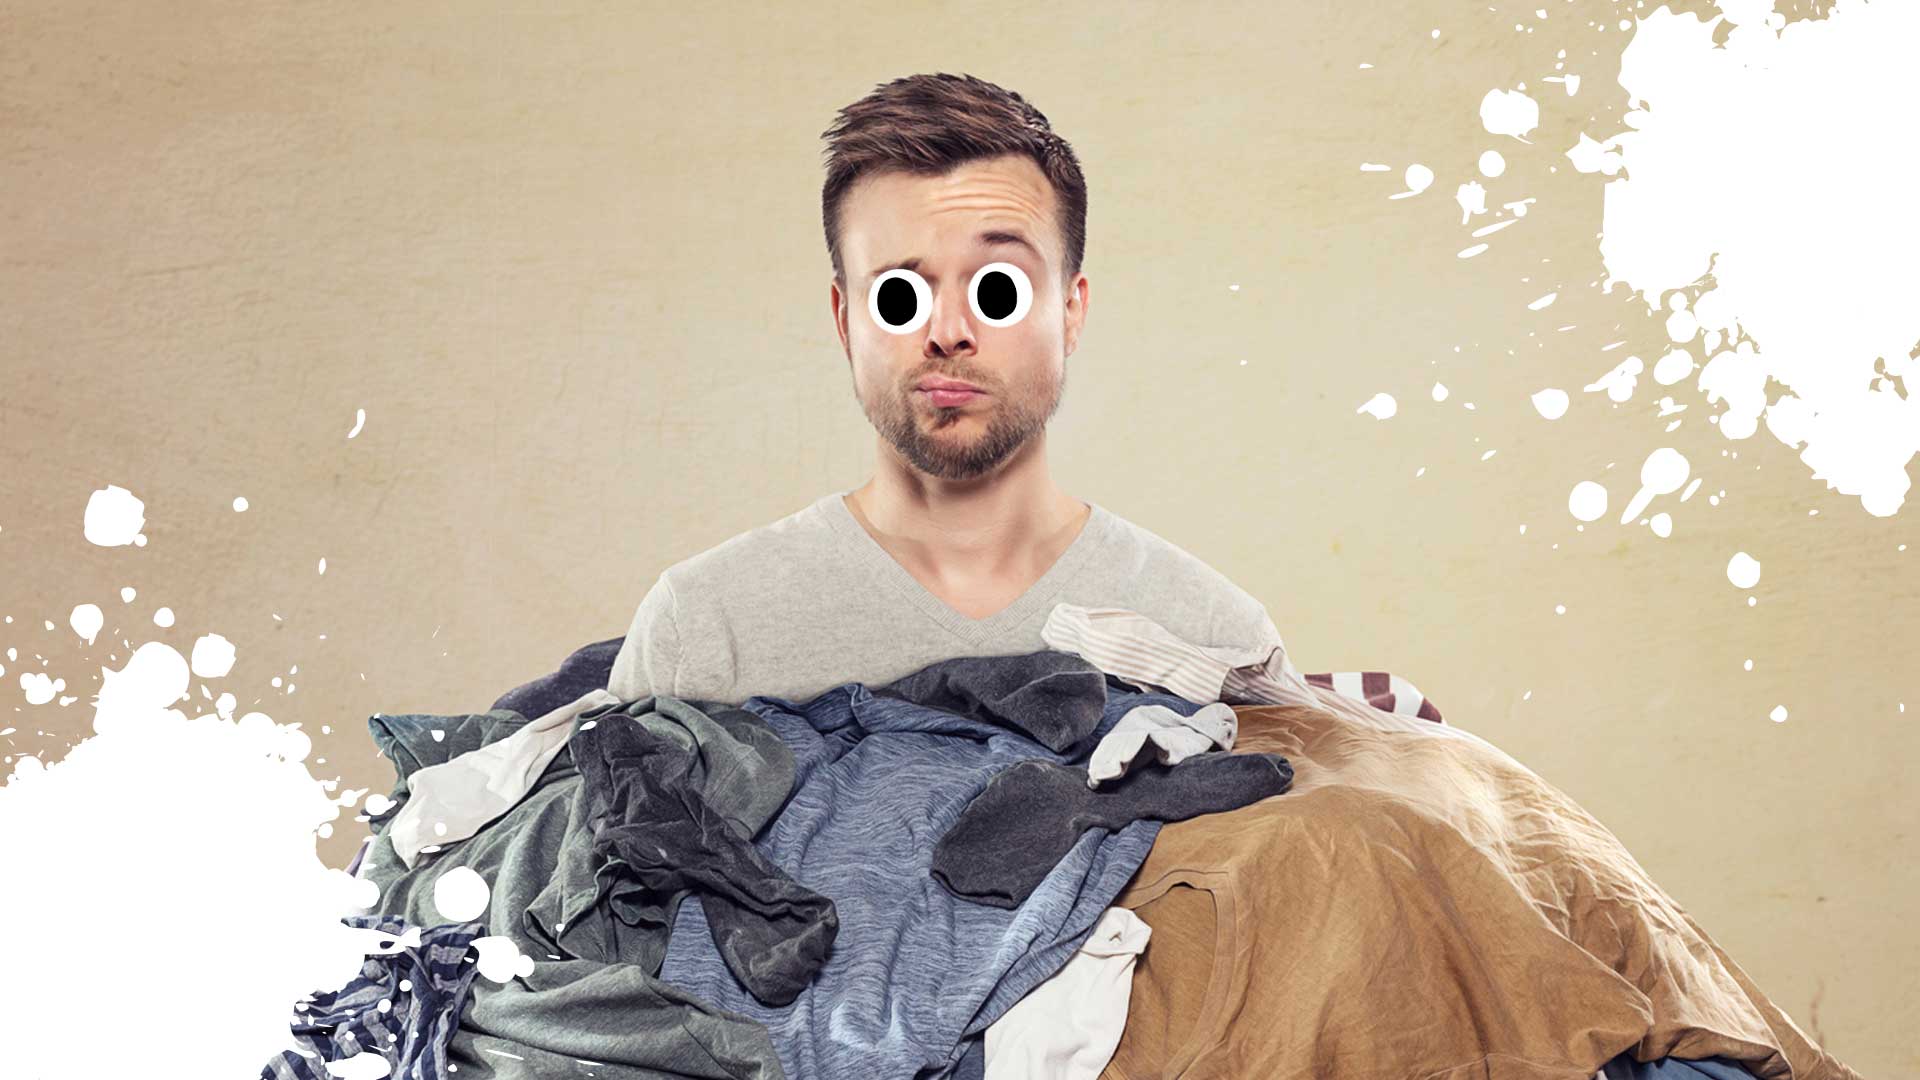 A man with a pile of dirty laundry